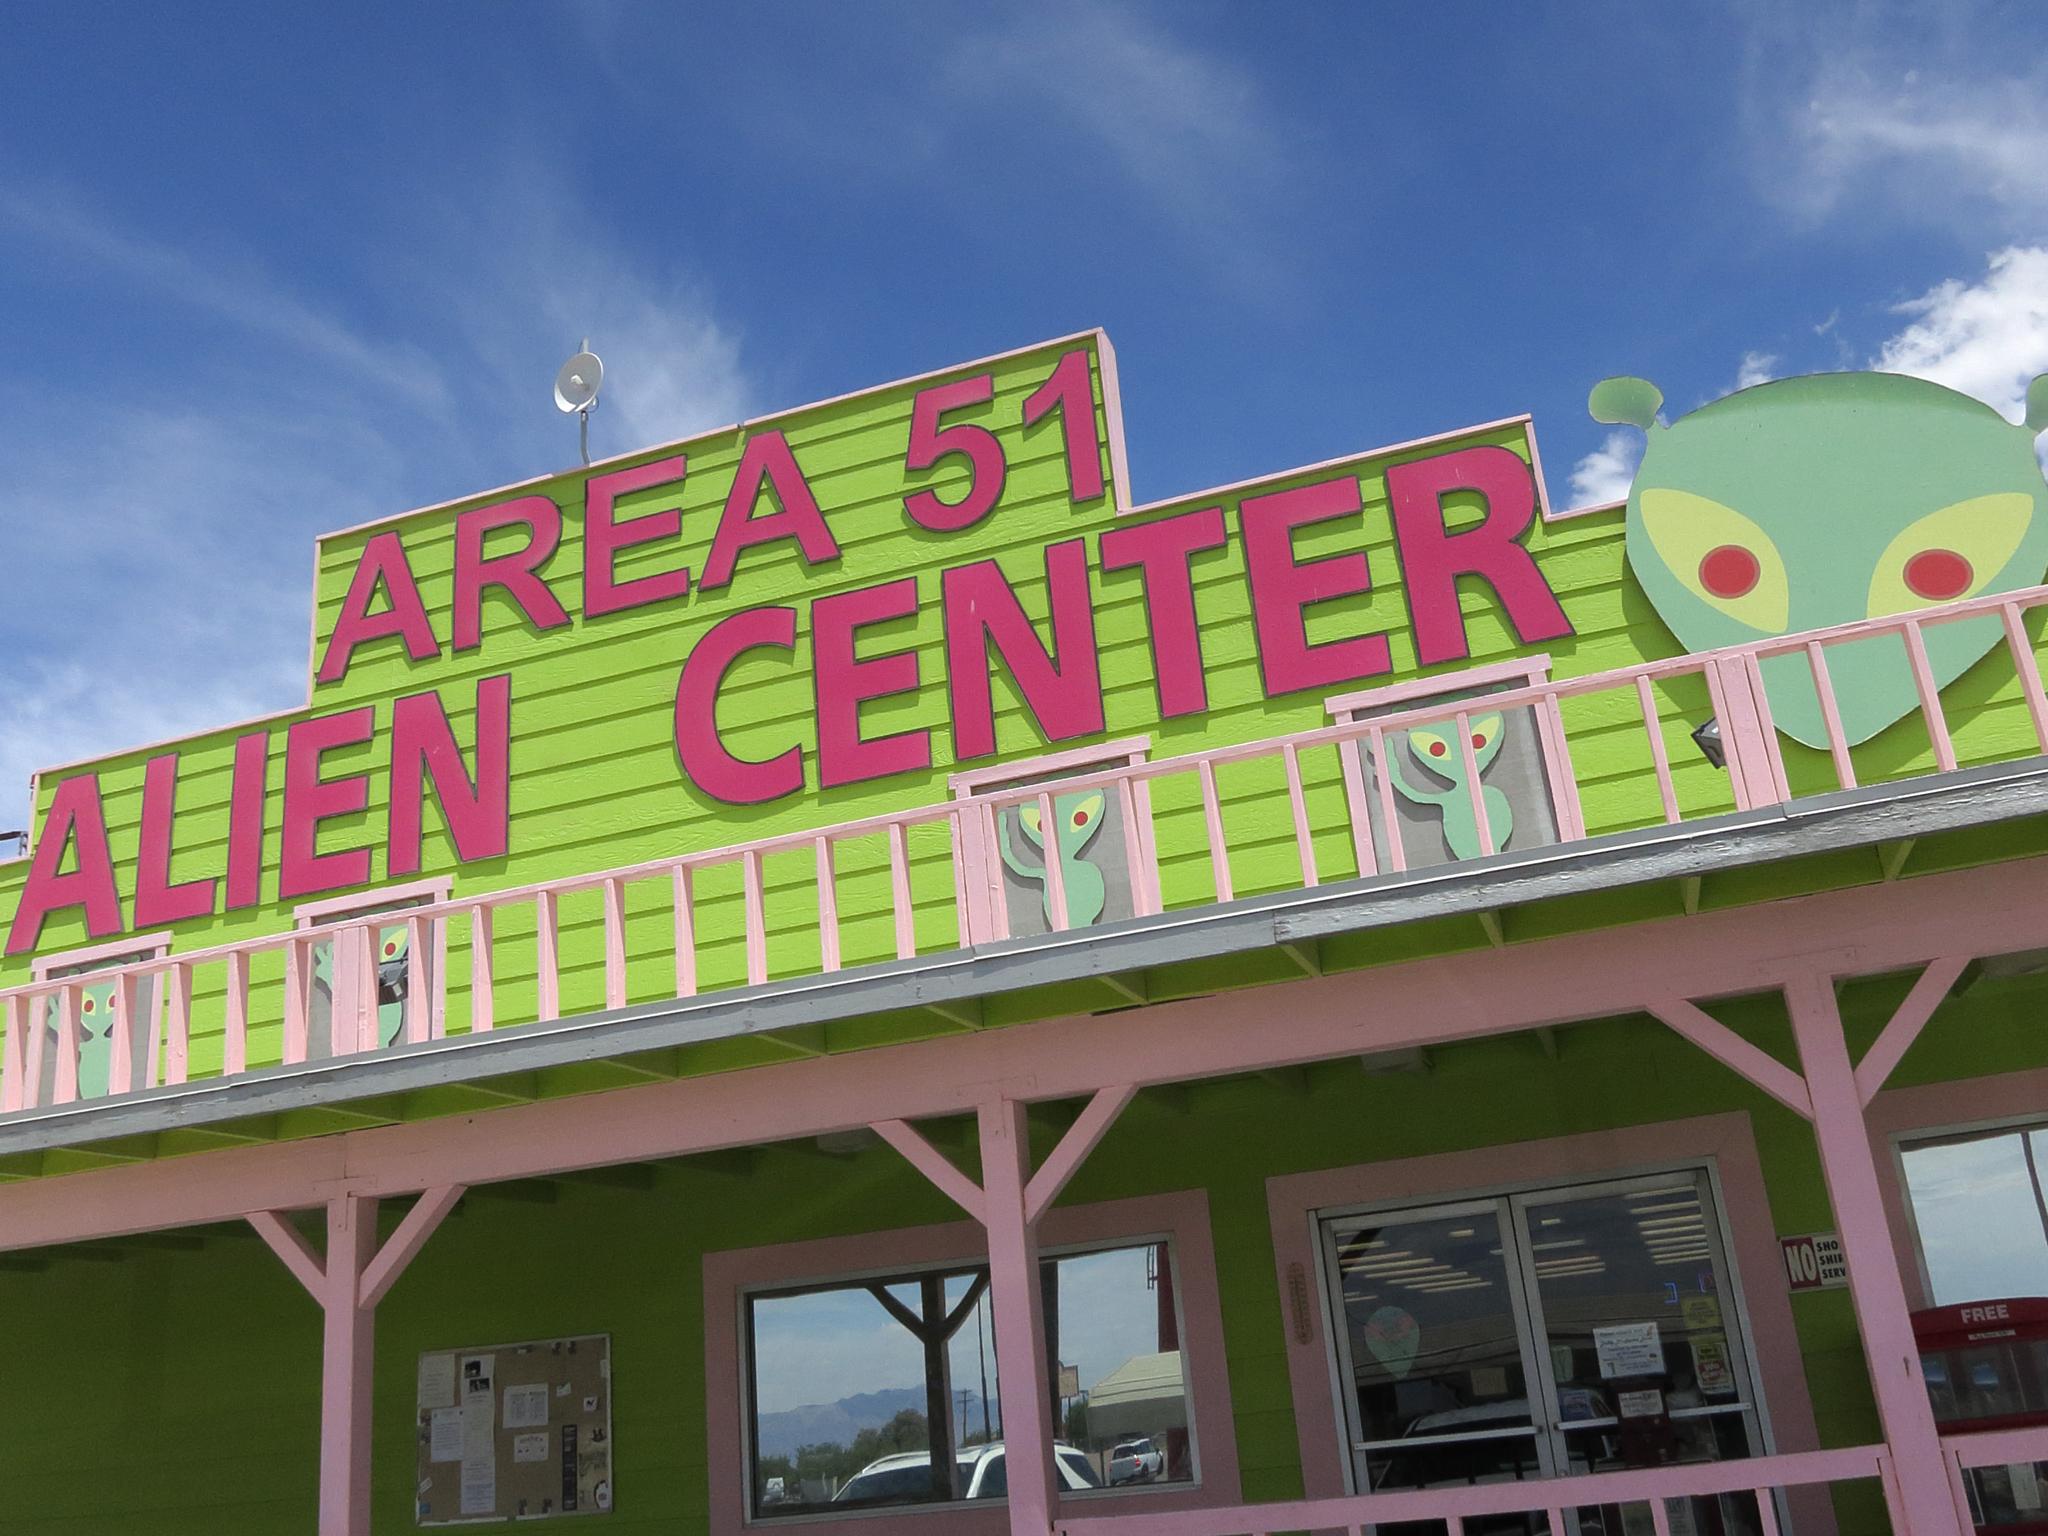 A souvenir shop that houses a brothel in an annex beckons visitors near a junction that leads to Area 51 on July 19, 2014 at Amergosa Valley, Nevada. Area 51 is another name for a portion of Edwards Air Force Base that UFO enthusiasts have theorized conta